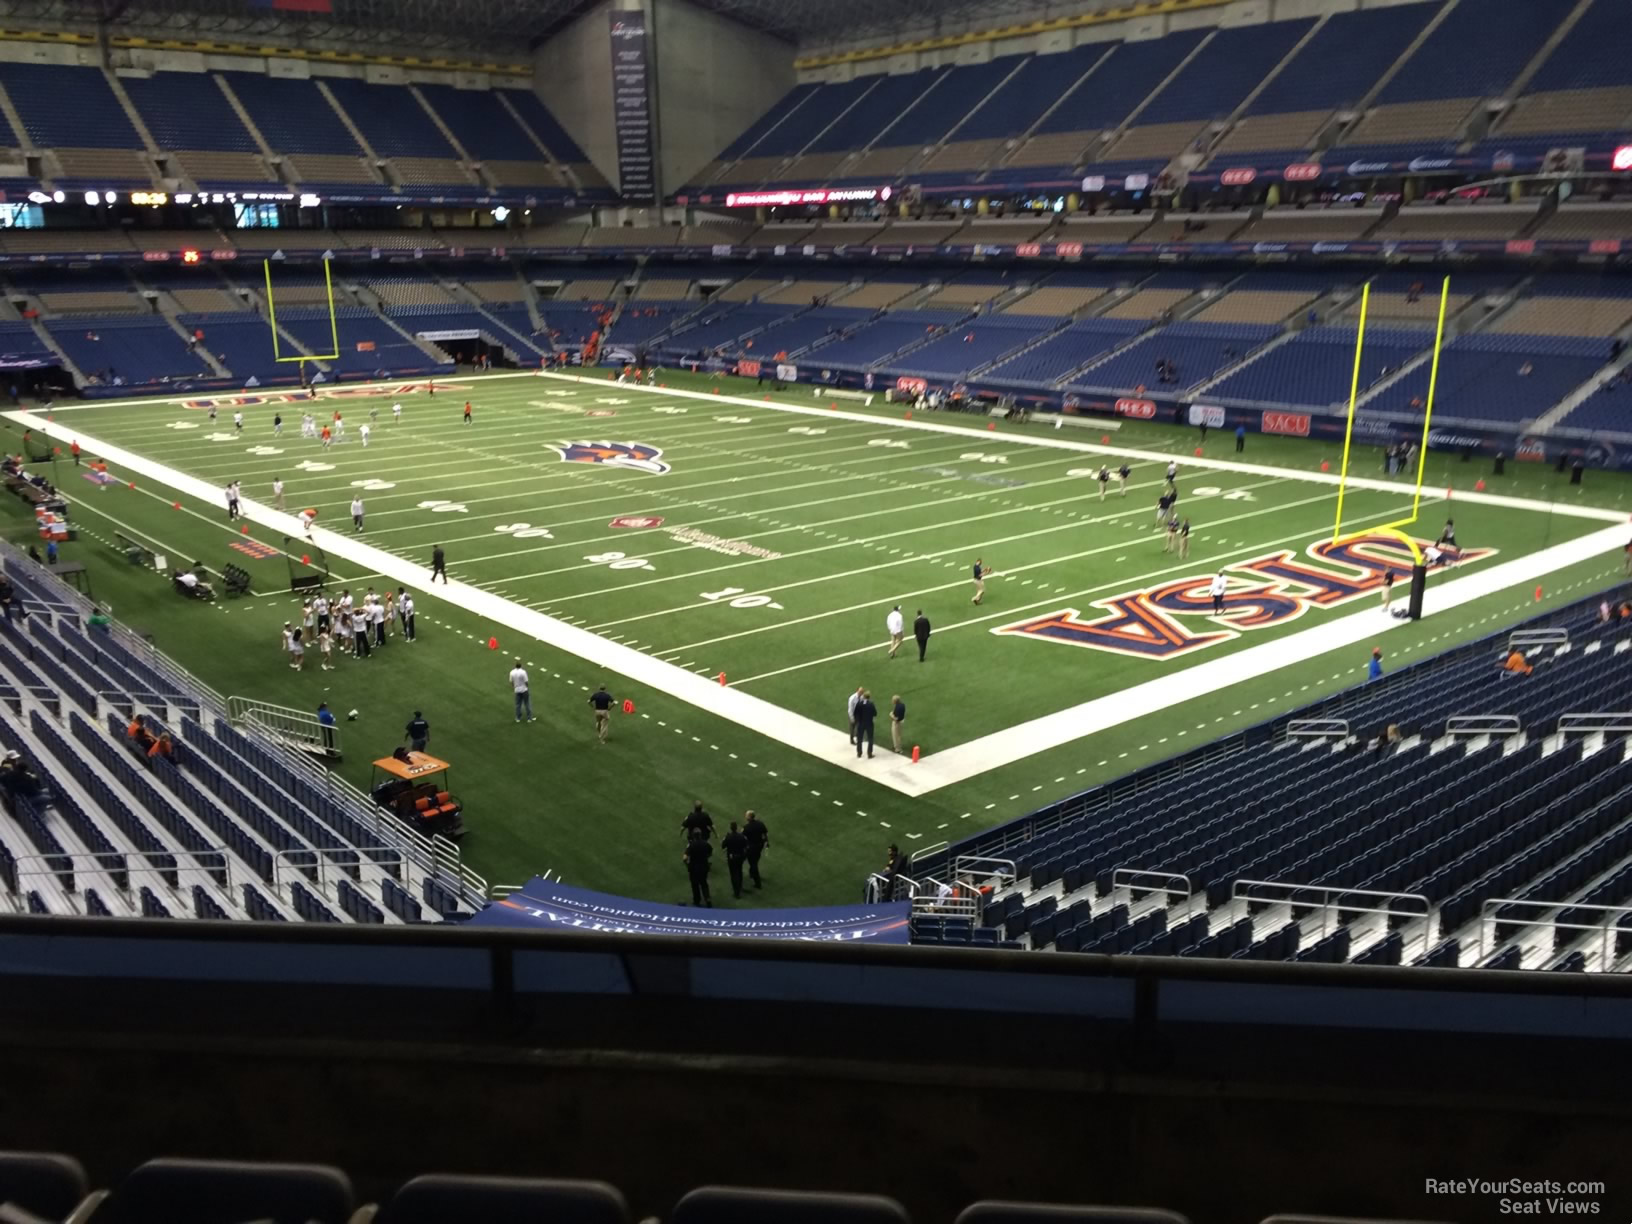 section 205a, row 5 seat view  for football - alamodome